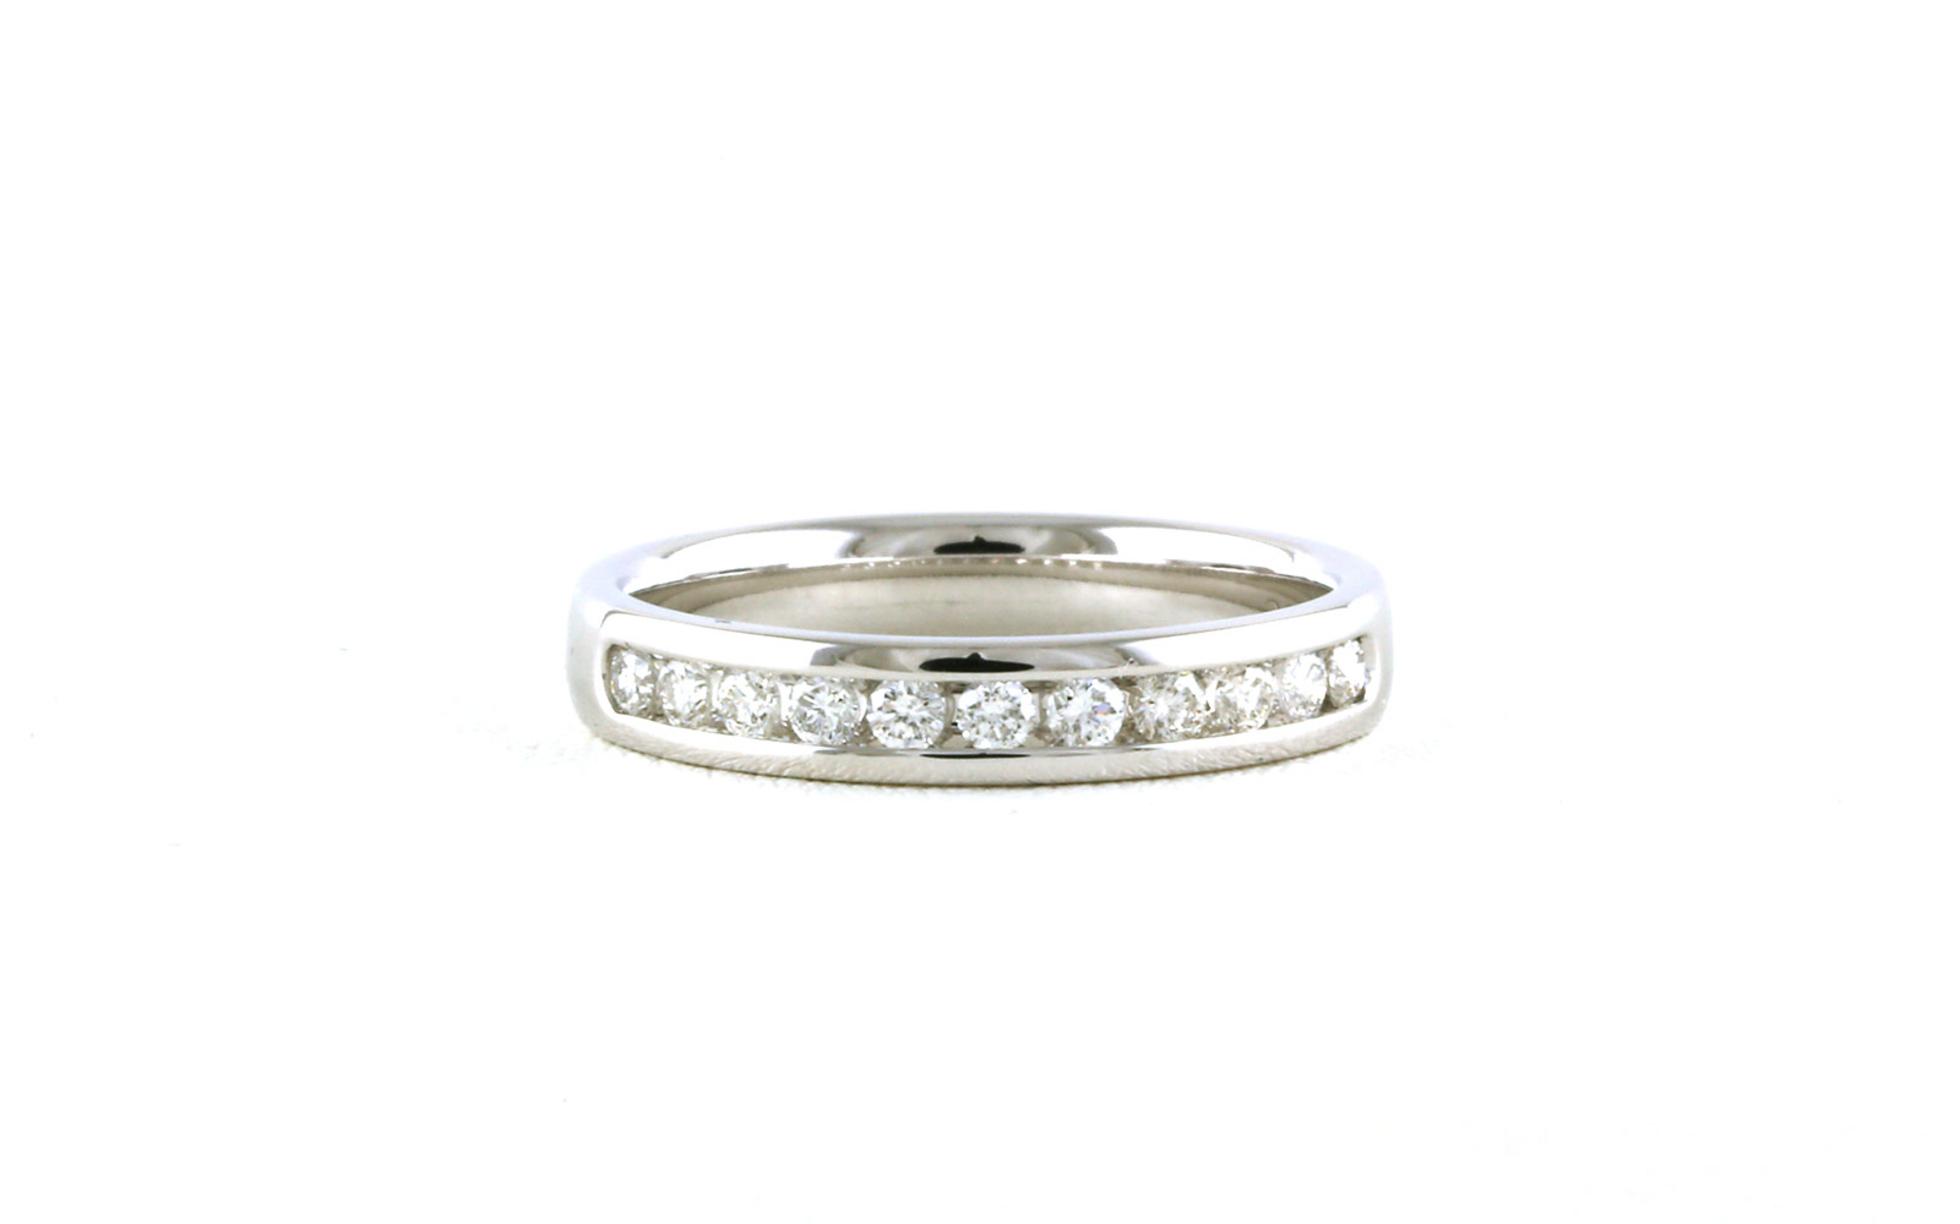 11-Stone Channel-set Wedding Band with Diamonds in White Gold (0.33cts TWT)